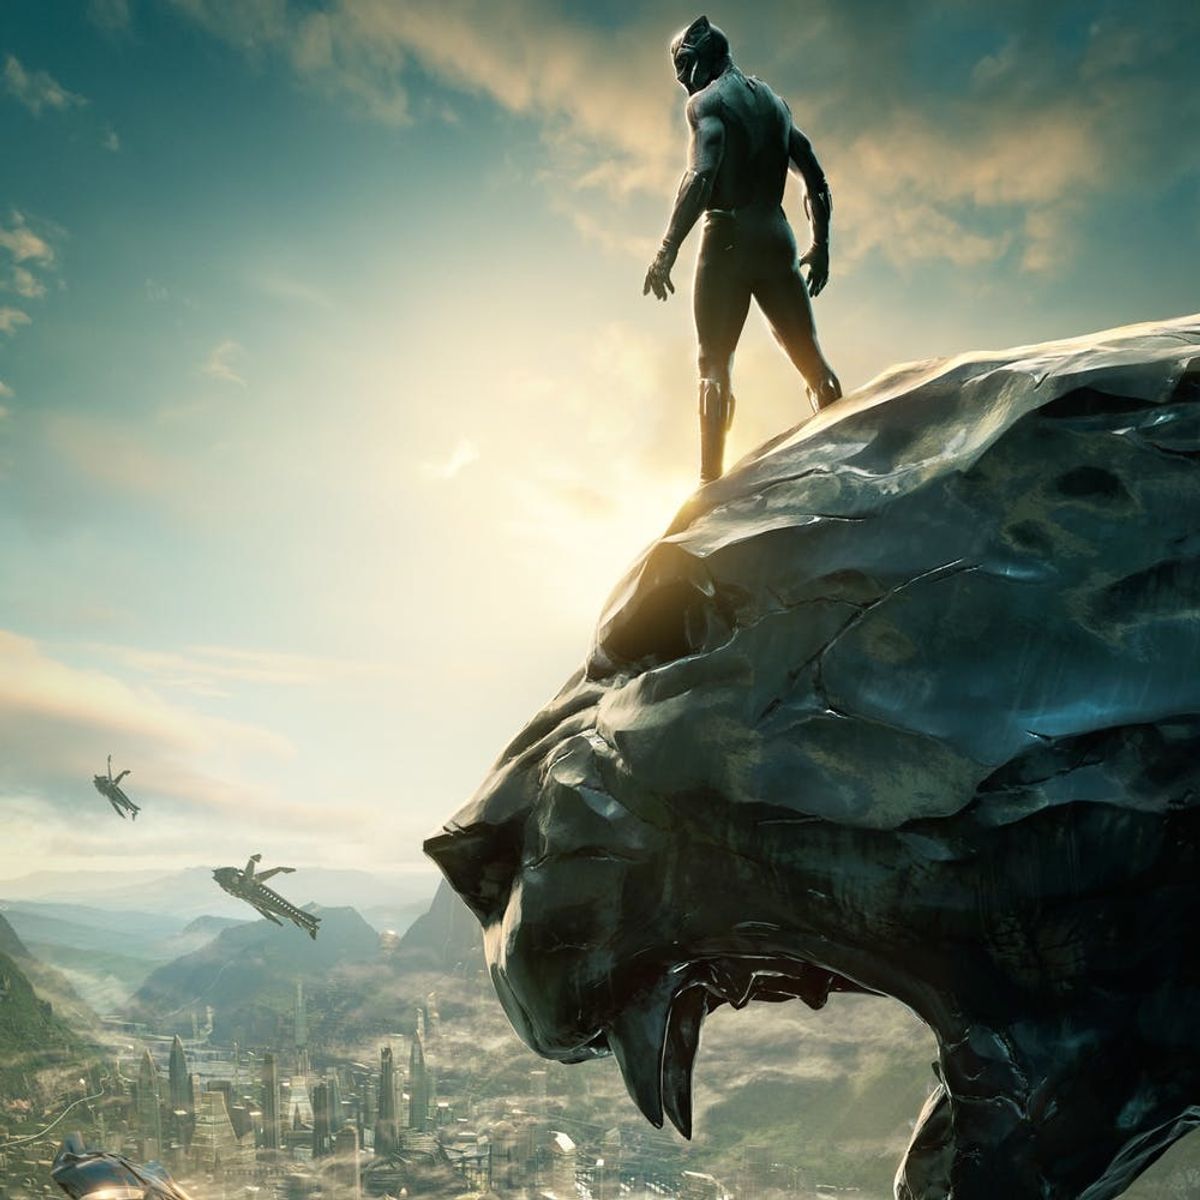 “Black Panther” Cast and Crew Discuss Why It’s Already Become a Cultural Phenomenon